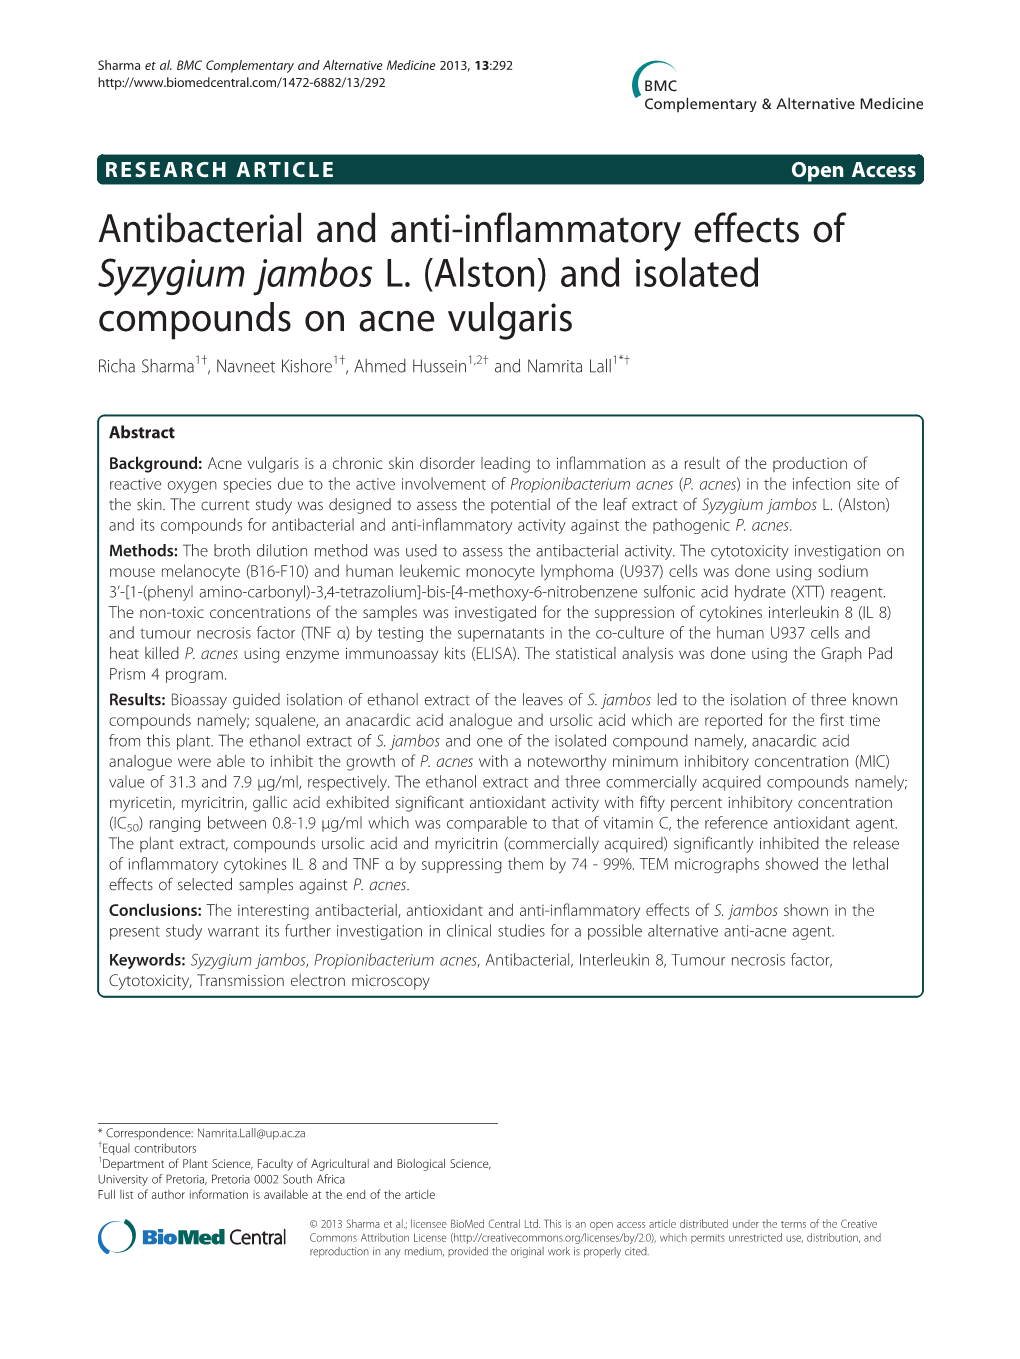 Antibacterial and Anti-Inflammatory Effects of Syzygium Jambos L